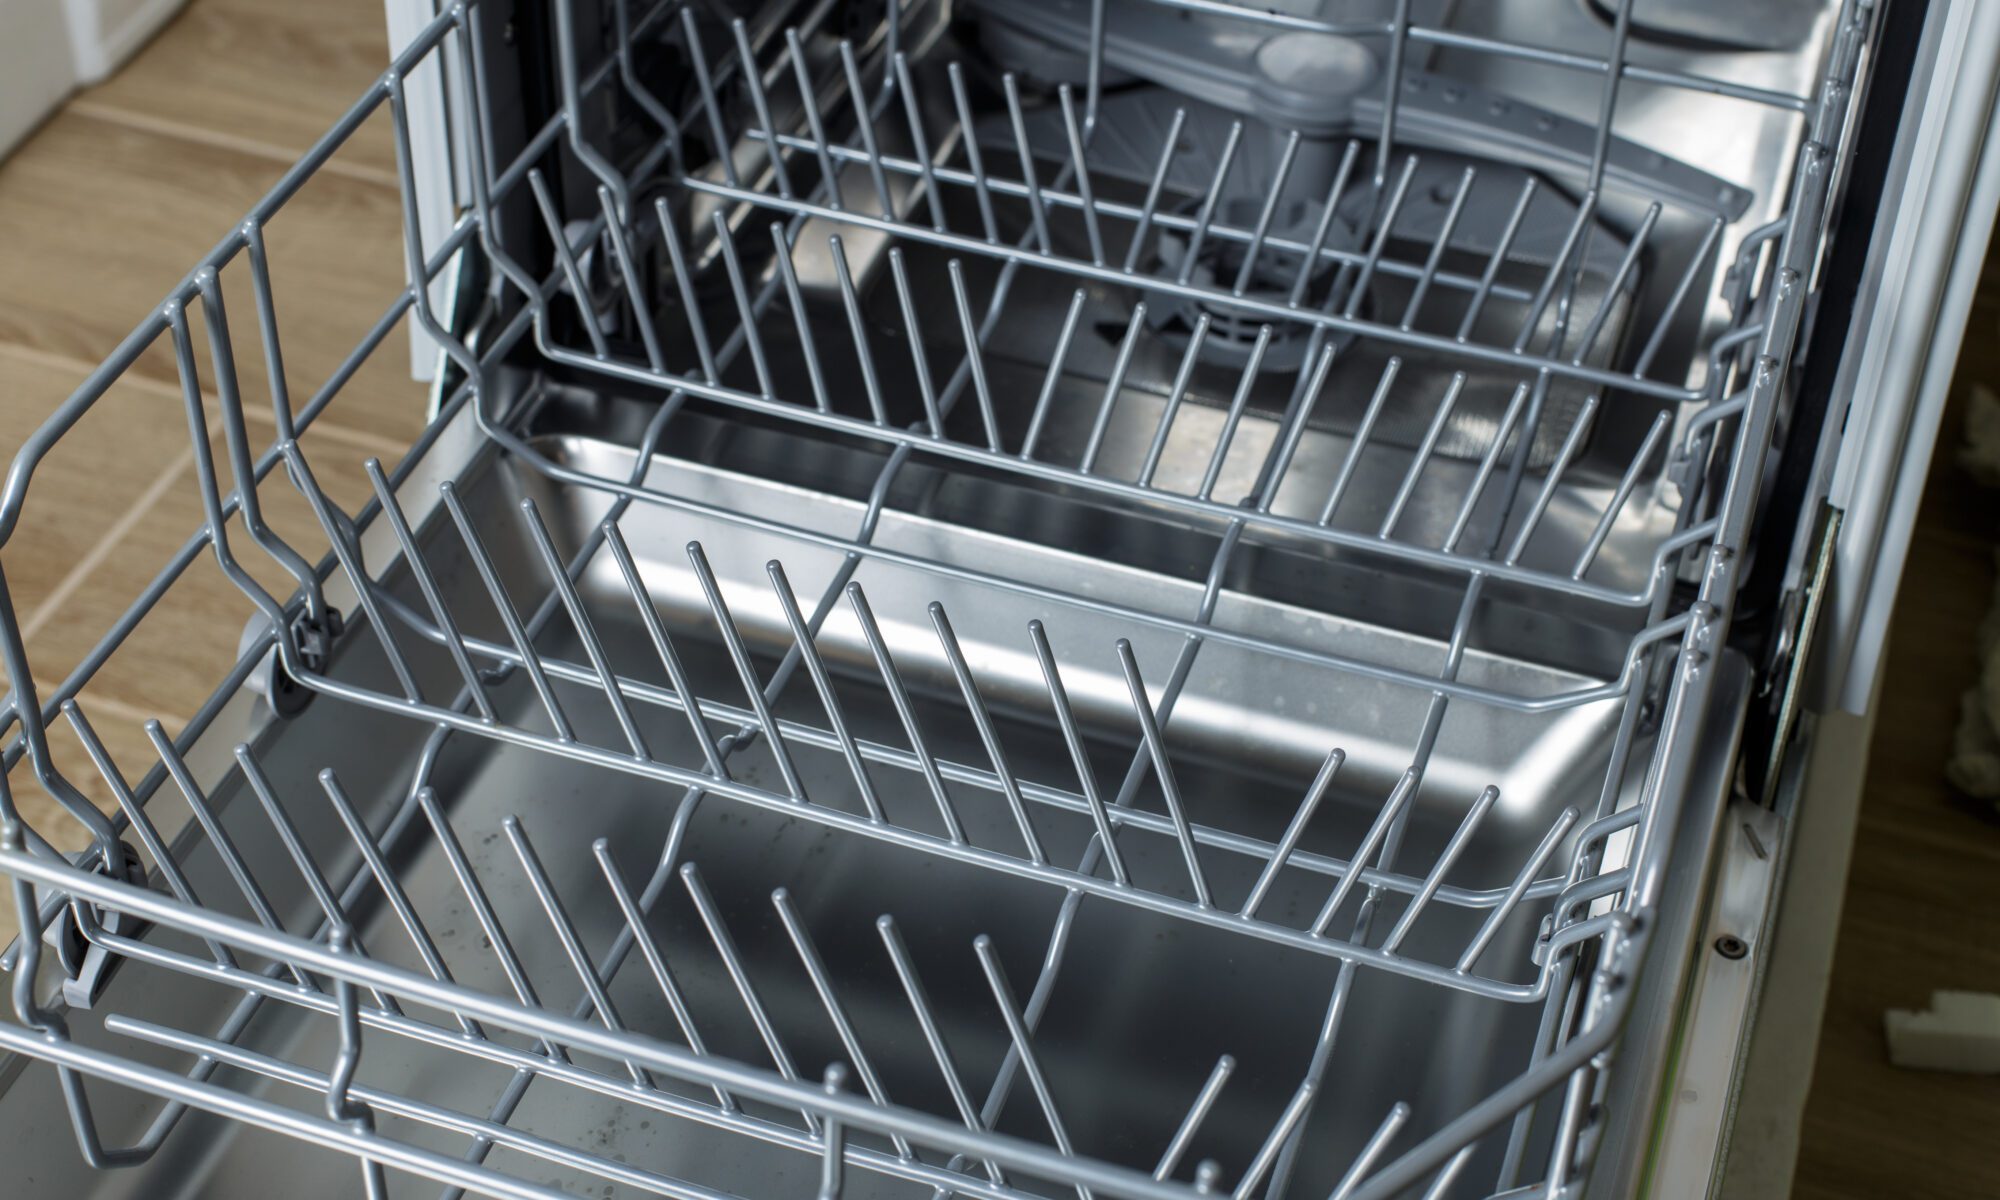 An open dishwasher with the bottom rack pulled out.